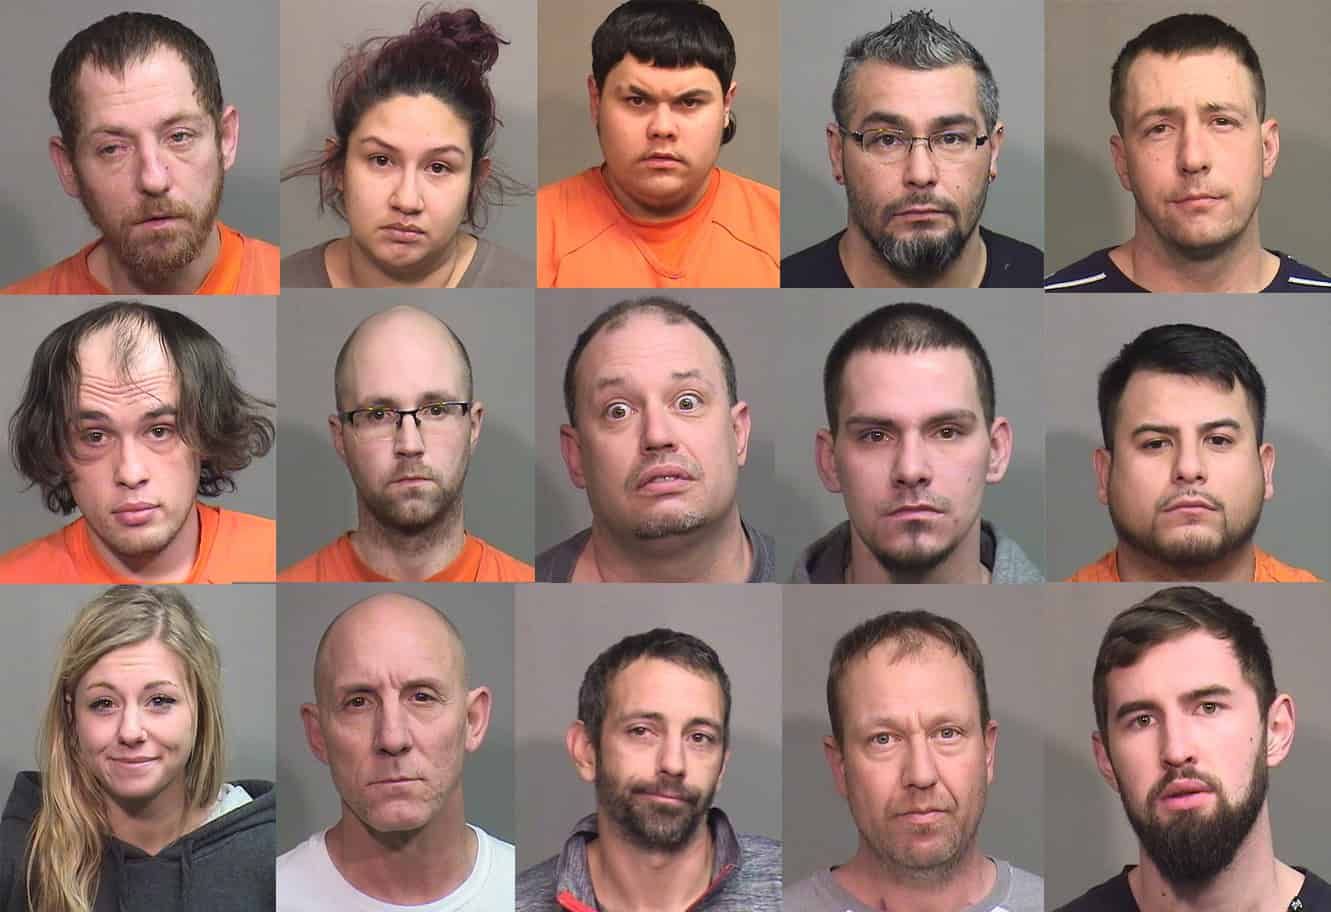 McHenry County Sheriff's Office arrests 15 people in felony warrant roundup